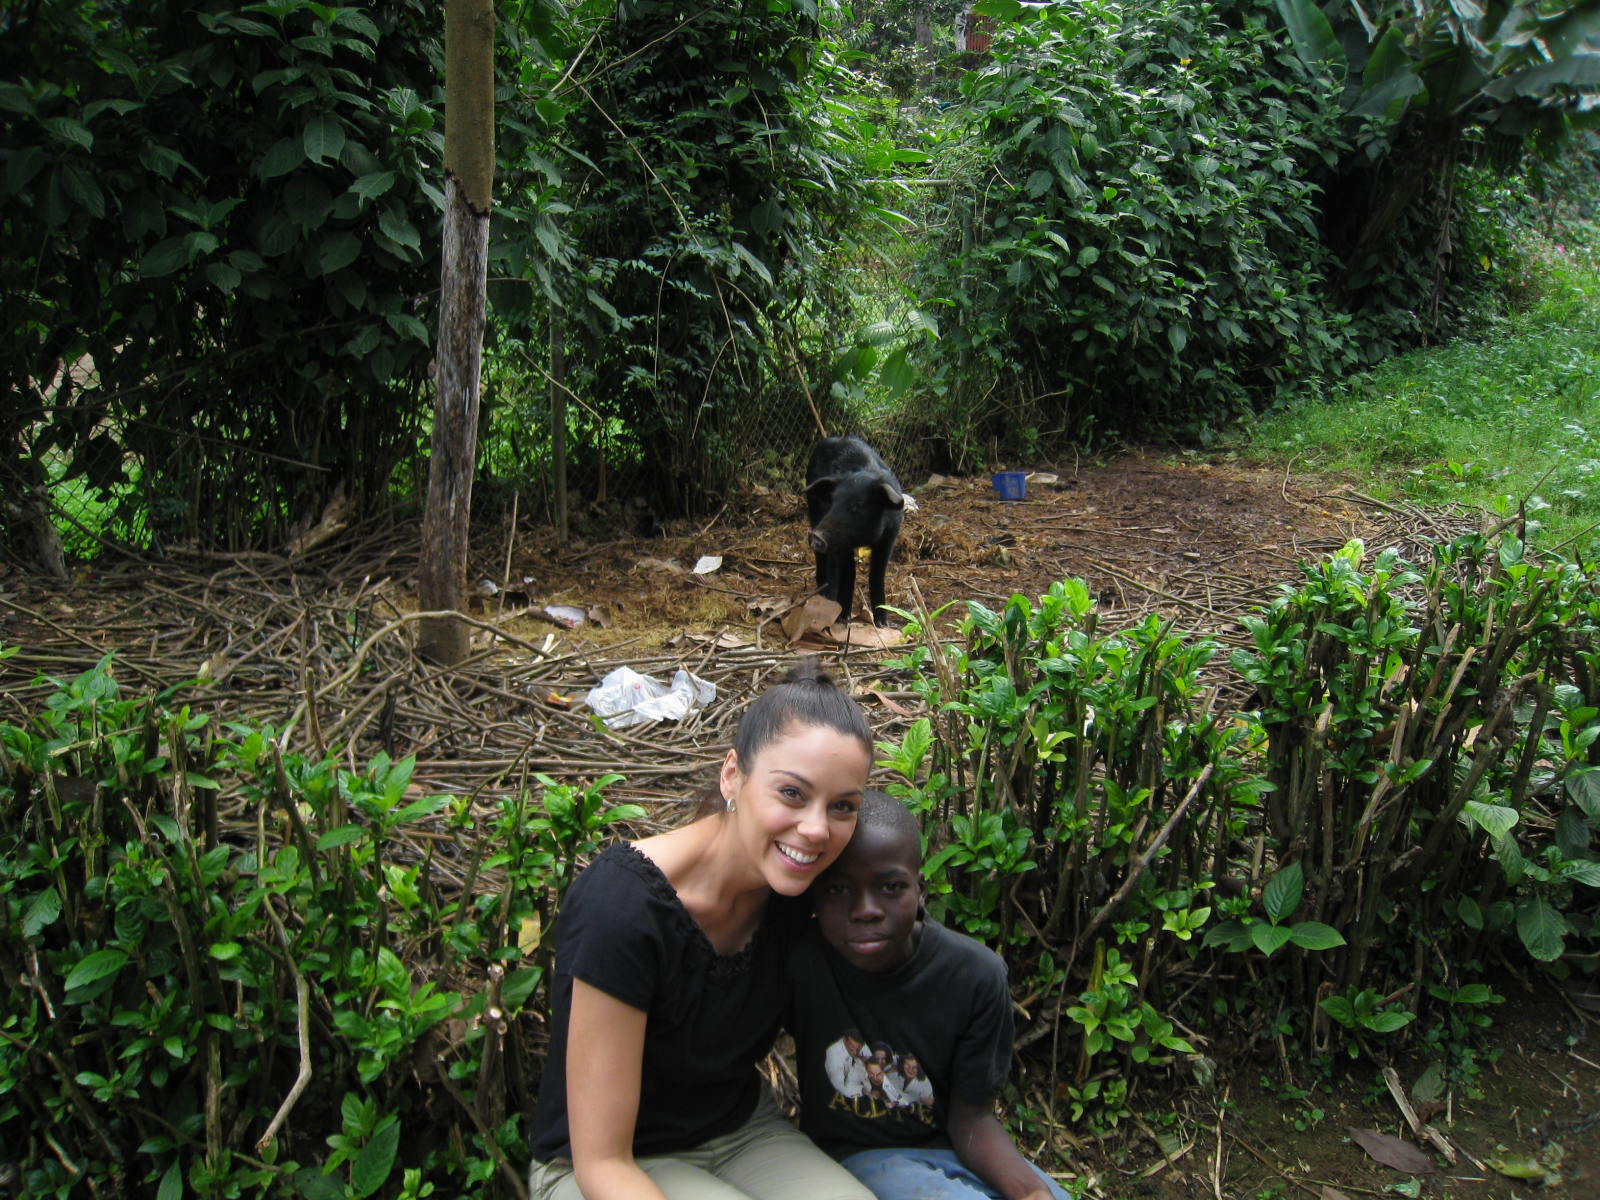 Tessa Munro with a Haitian boy, Samuel, and a cute pig (behind them) in the mountains of Haiti (January, 2012). Humanitarian work and Haiti are important to her.